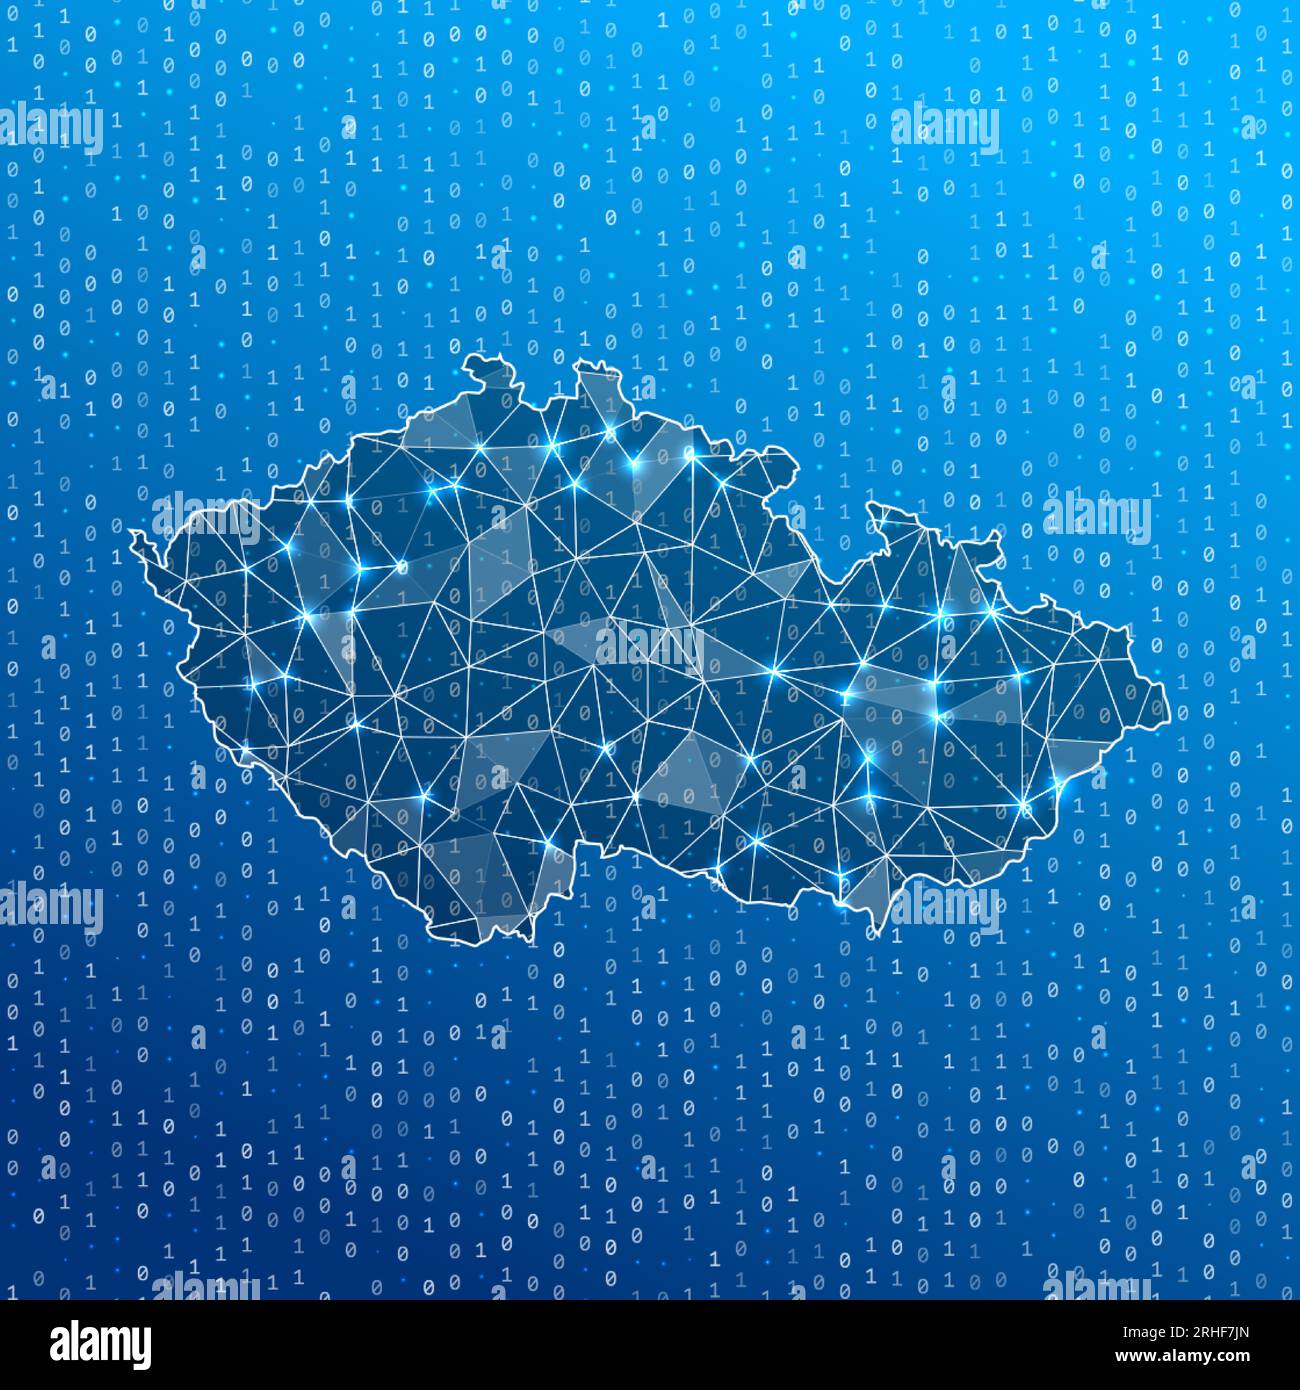 Network map of Czech Republic. Country digital connections map. Technology, internet, network, telecommunication concept. Vector illustration. Stock Vector